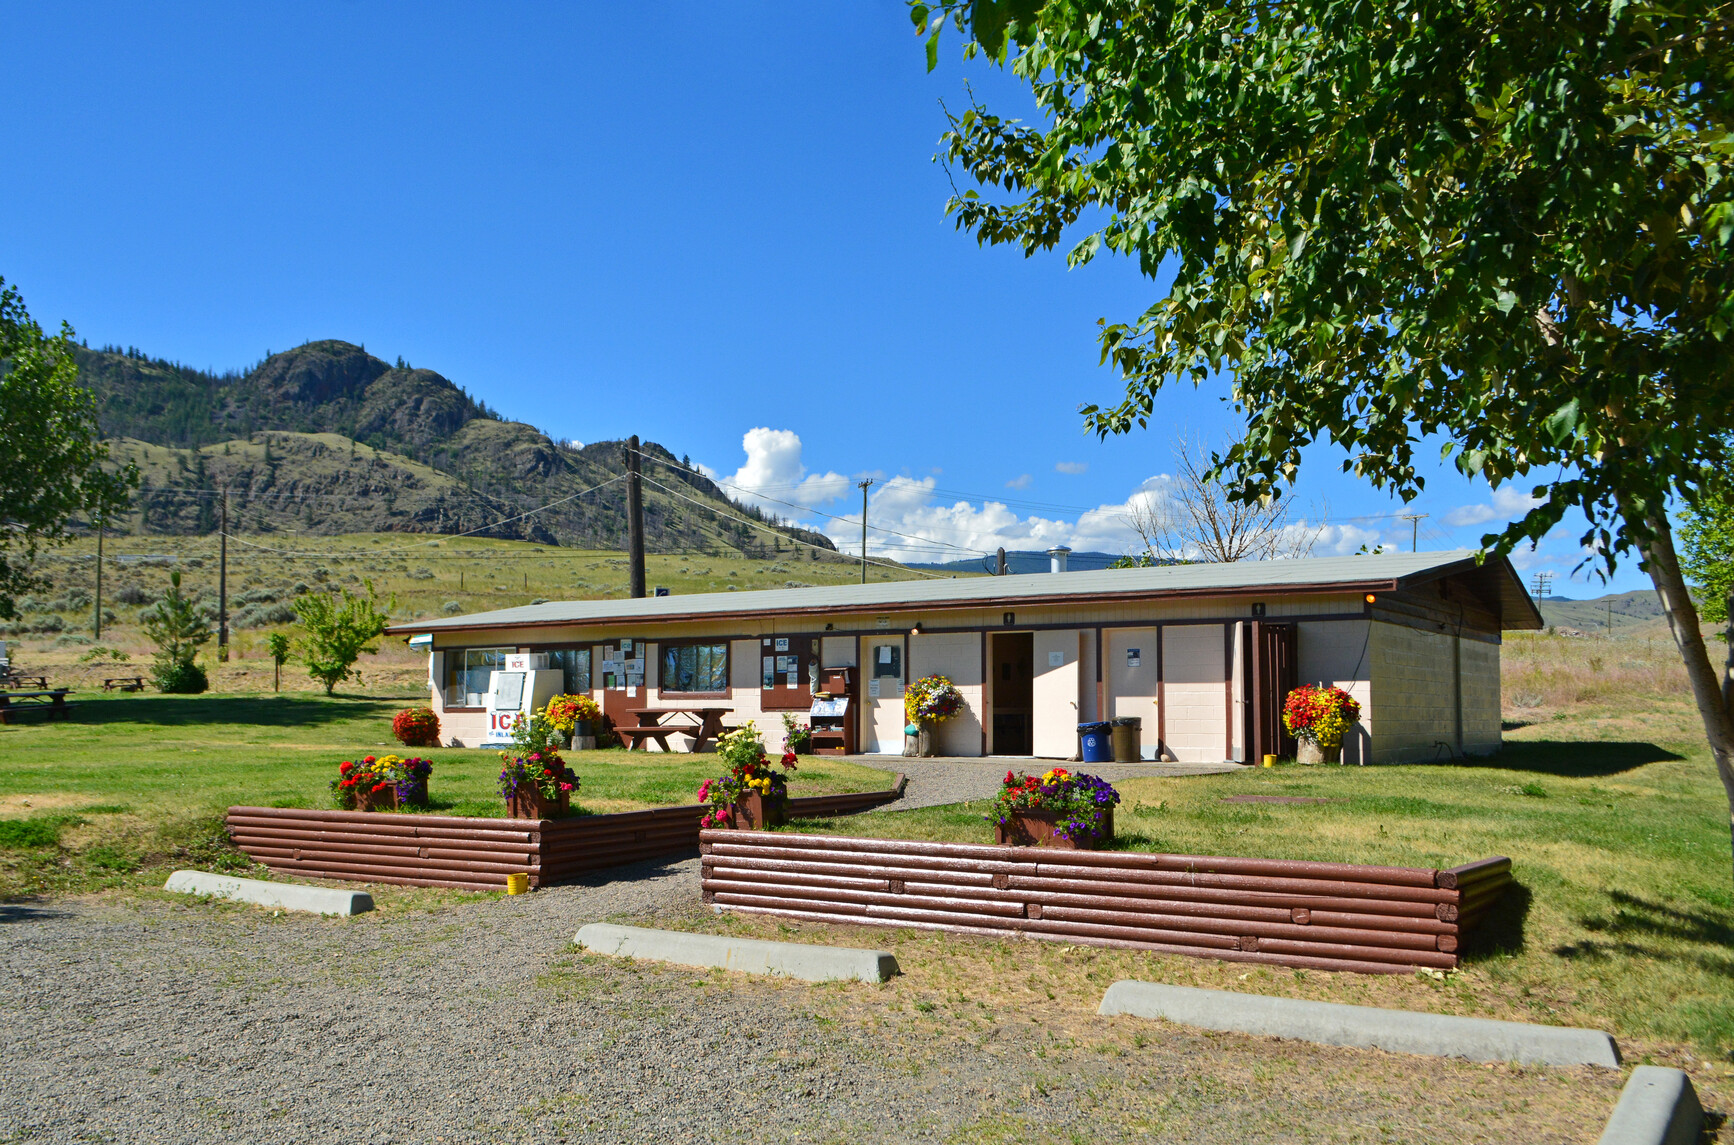 A gravel walkway leading to a grassy area and shower building. Icebox, picnic table and potted flowers are in front of building. Forested mountains and trees are in the background.